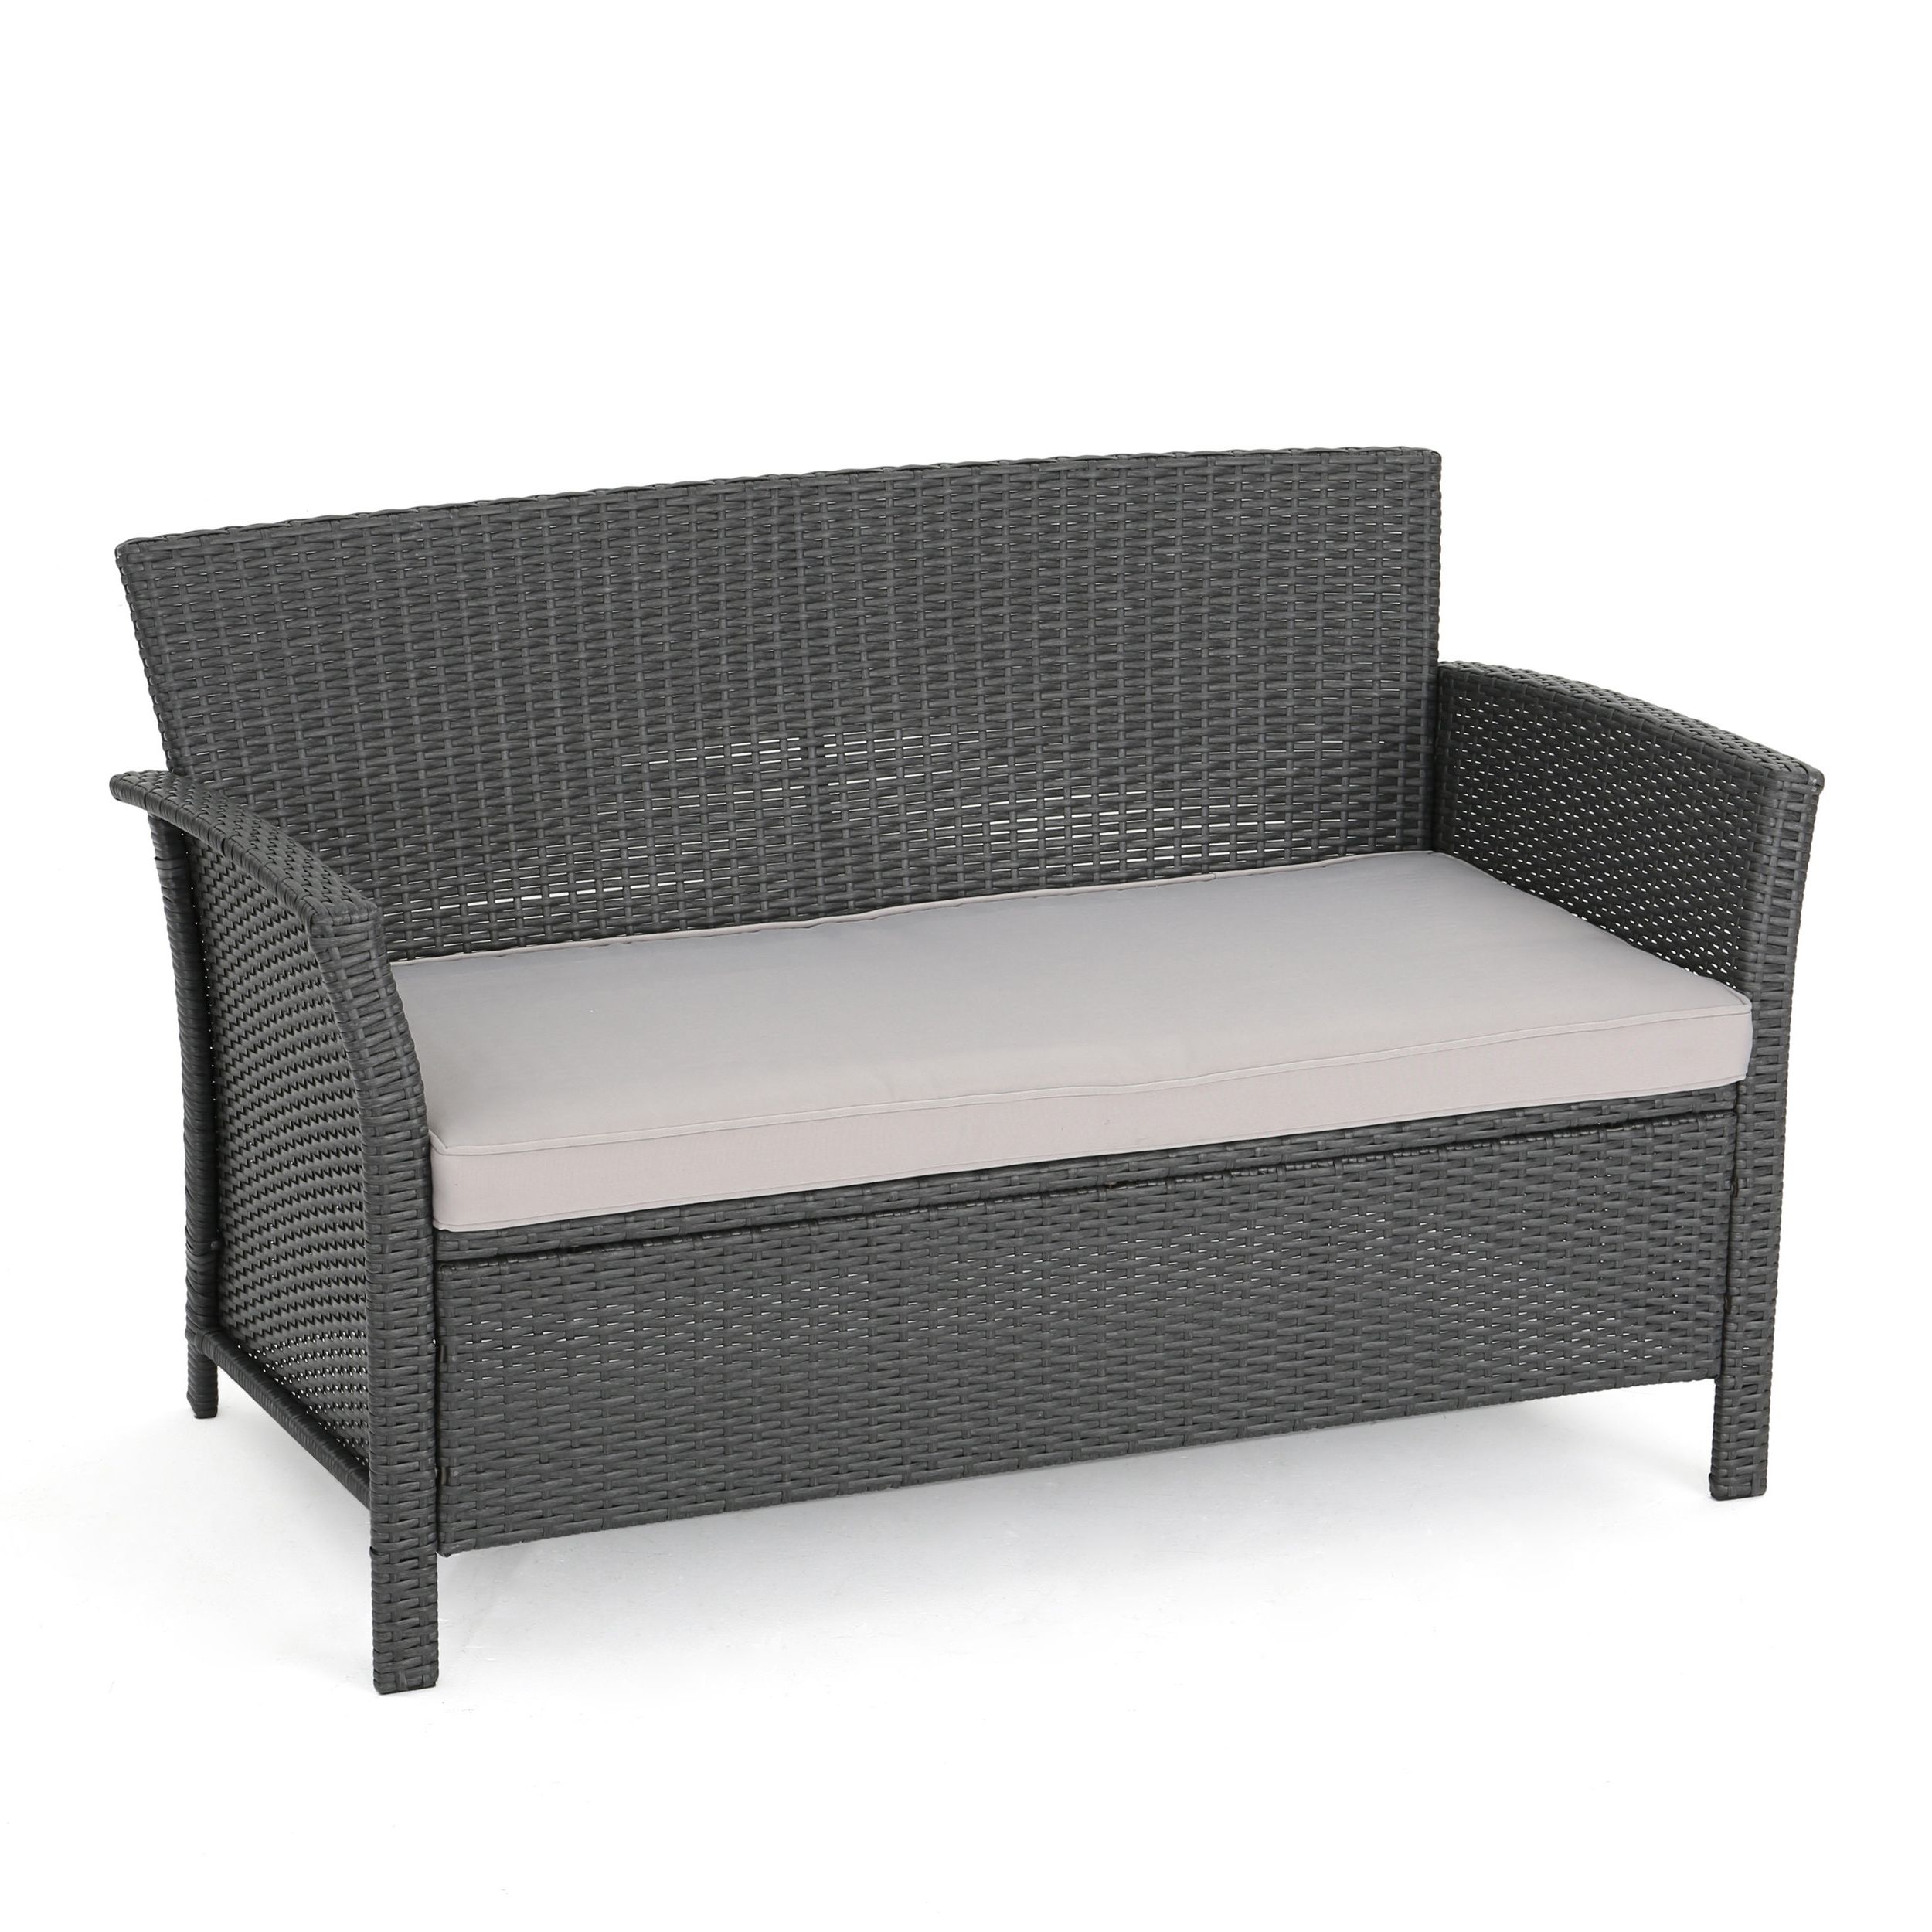 Well Known Rummond Outdoor Wicker Loveseat With Cushions Regarding Wicker Loveseats (View 9 of 20)